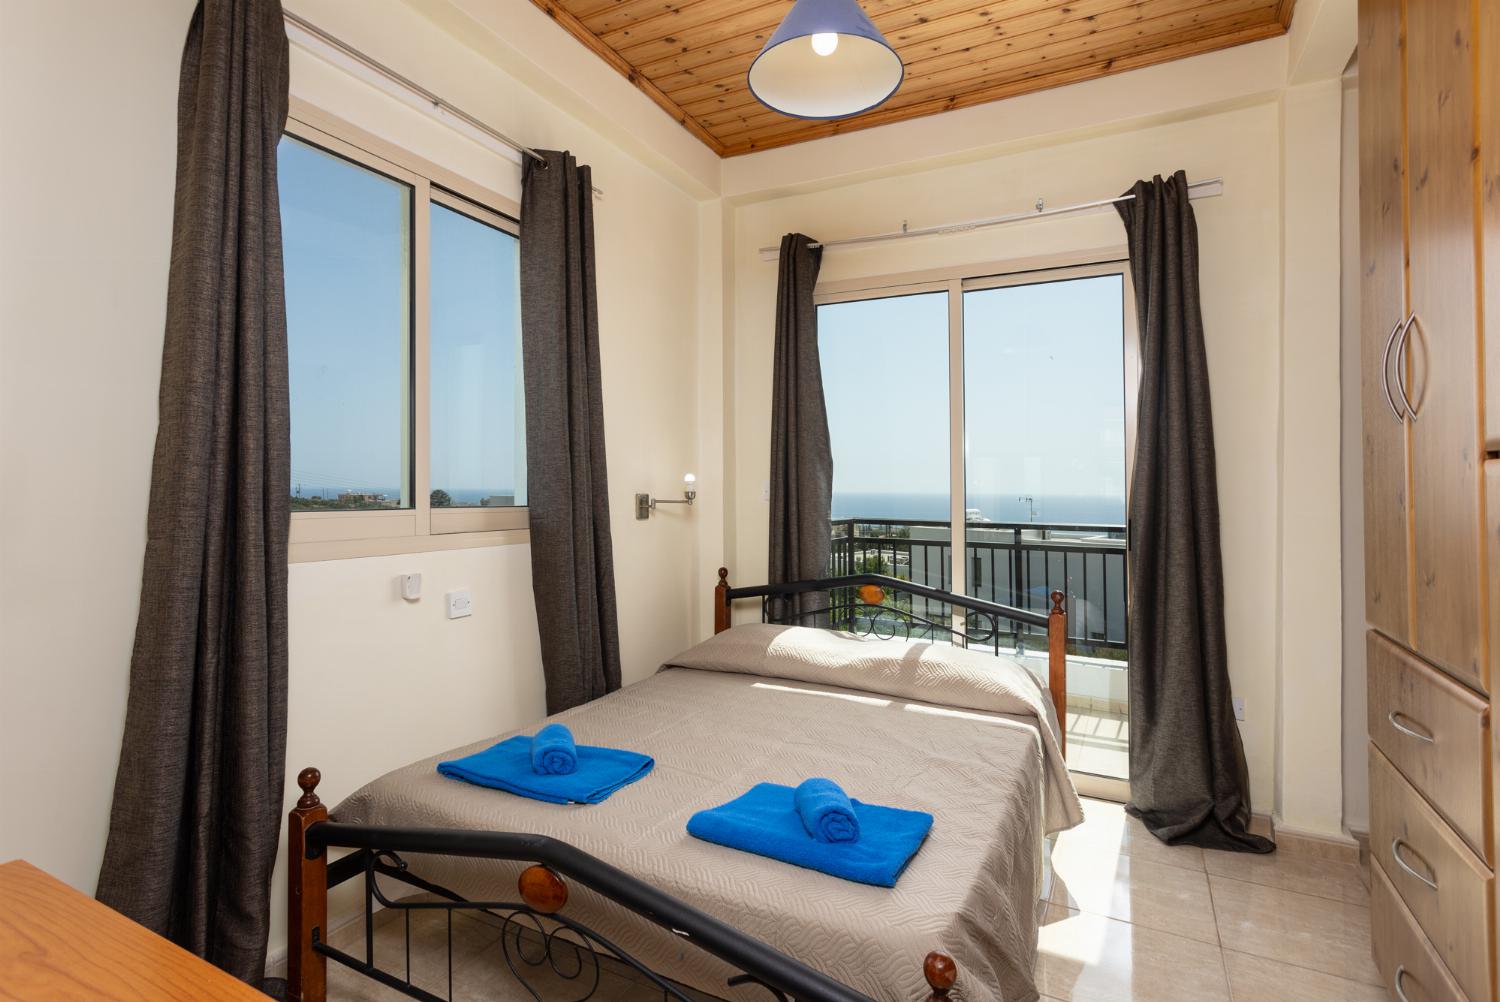 Double bedroom on first floor with en suite bathroom, A/C, sea views, and balcony access